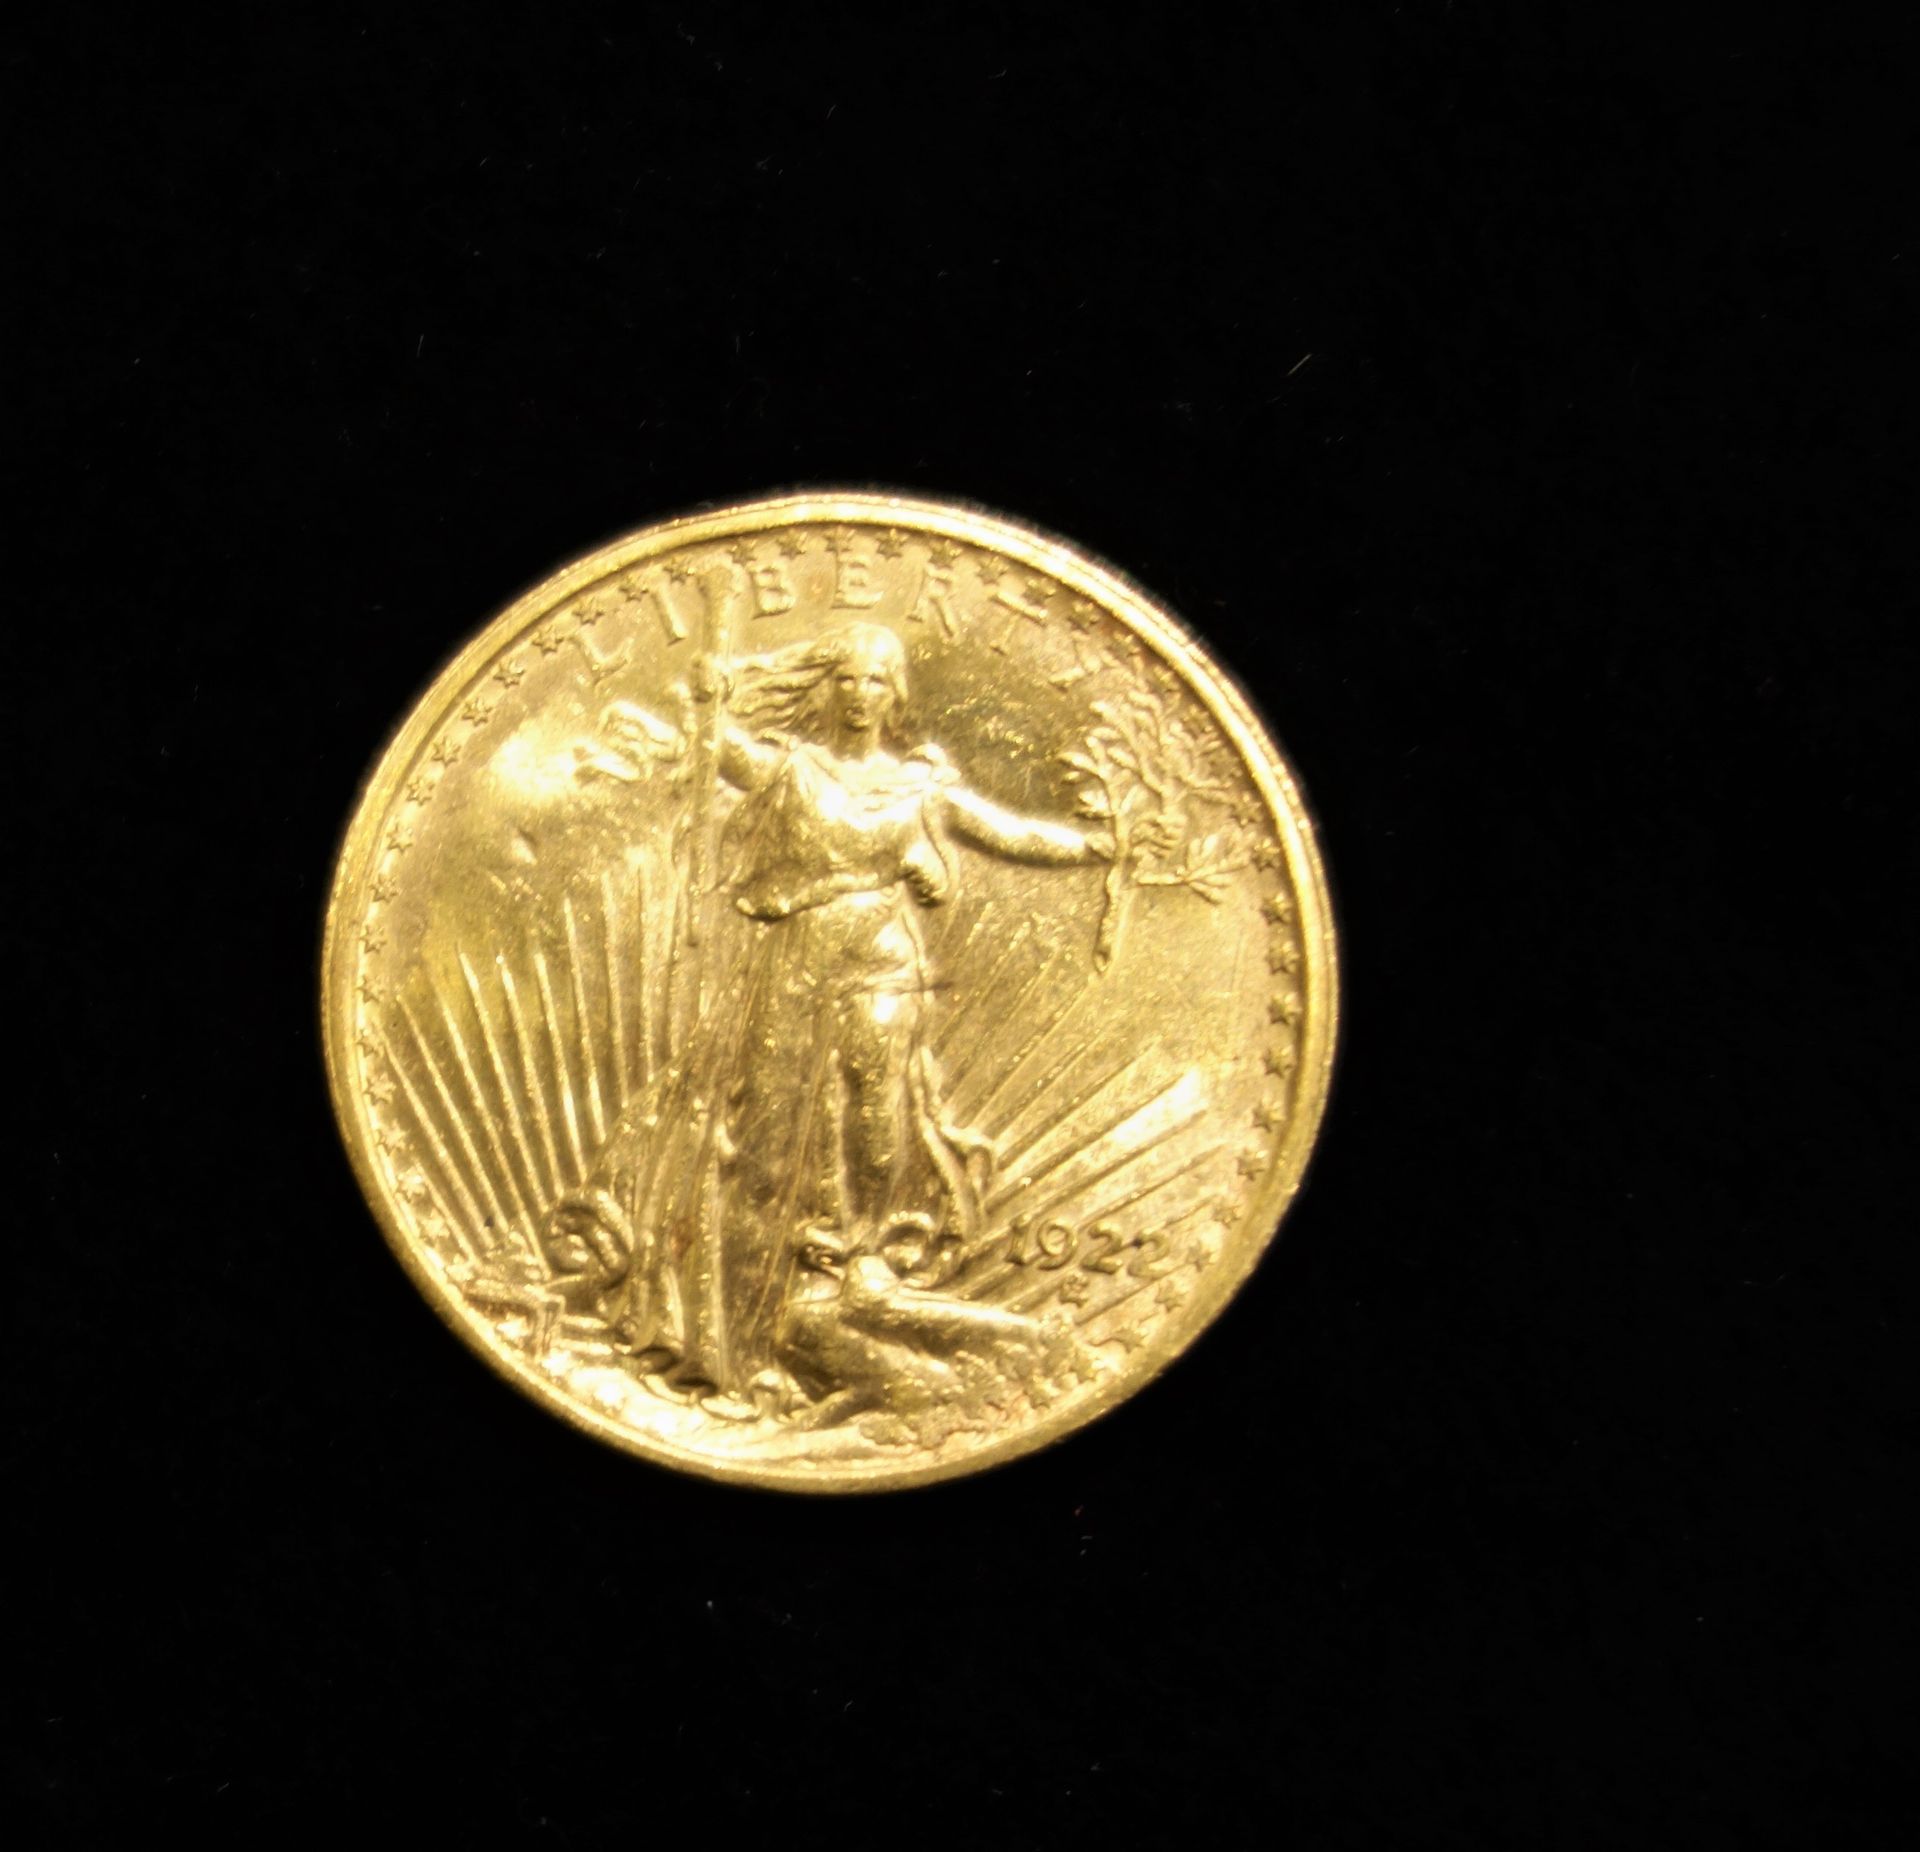 Null 20 US $ Liberty gold coin.
Weight: 33,42 g